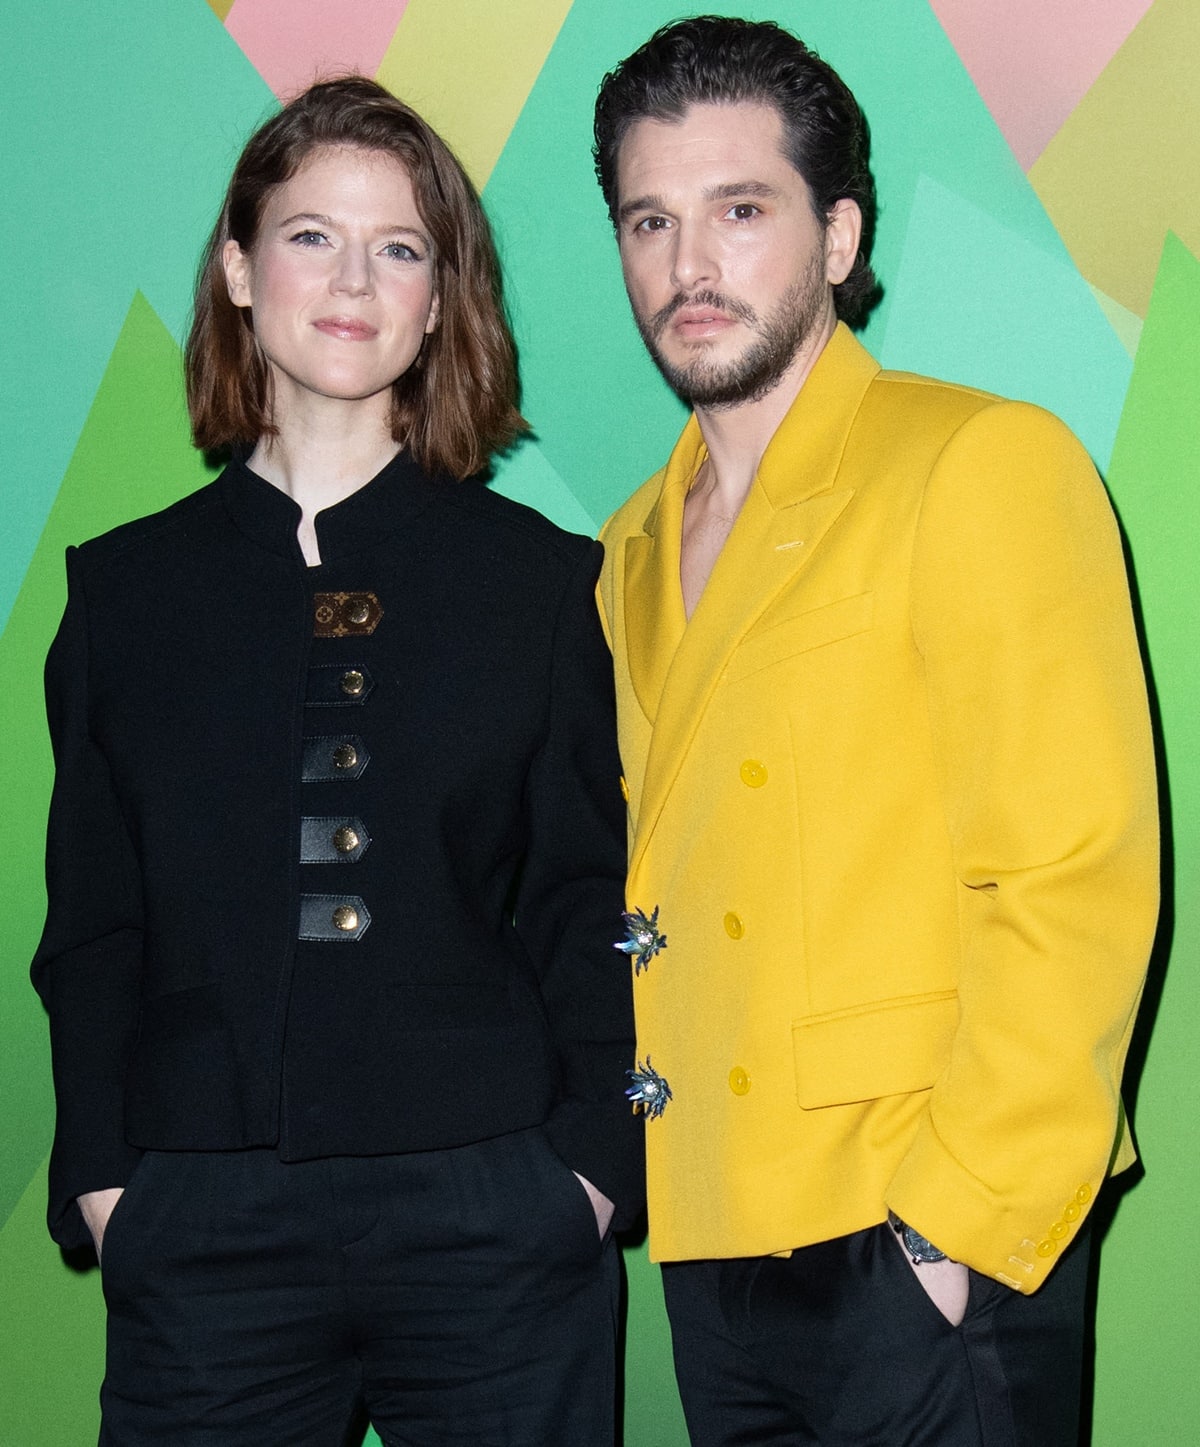 Kit Harington sported a bright yellow blazer with checkerboard-printed loafers, while Rose Leslie wore a black blazer with gold buttons and black pants and shoes